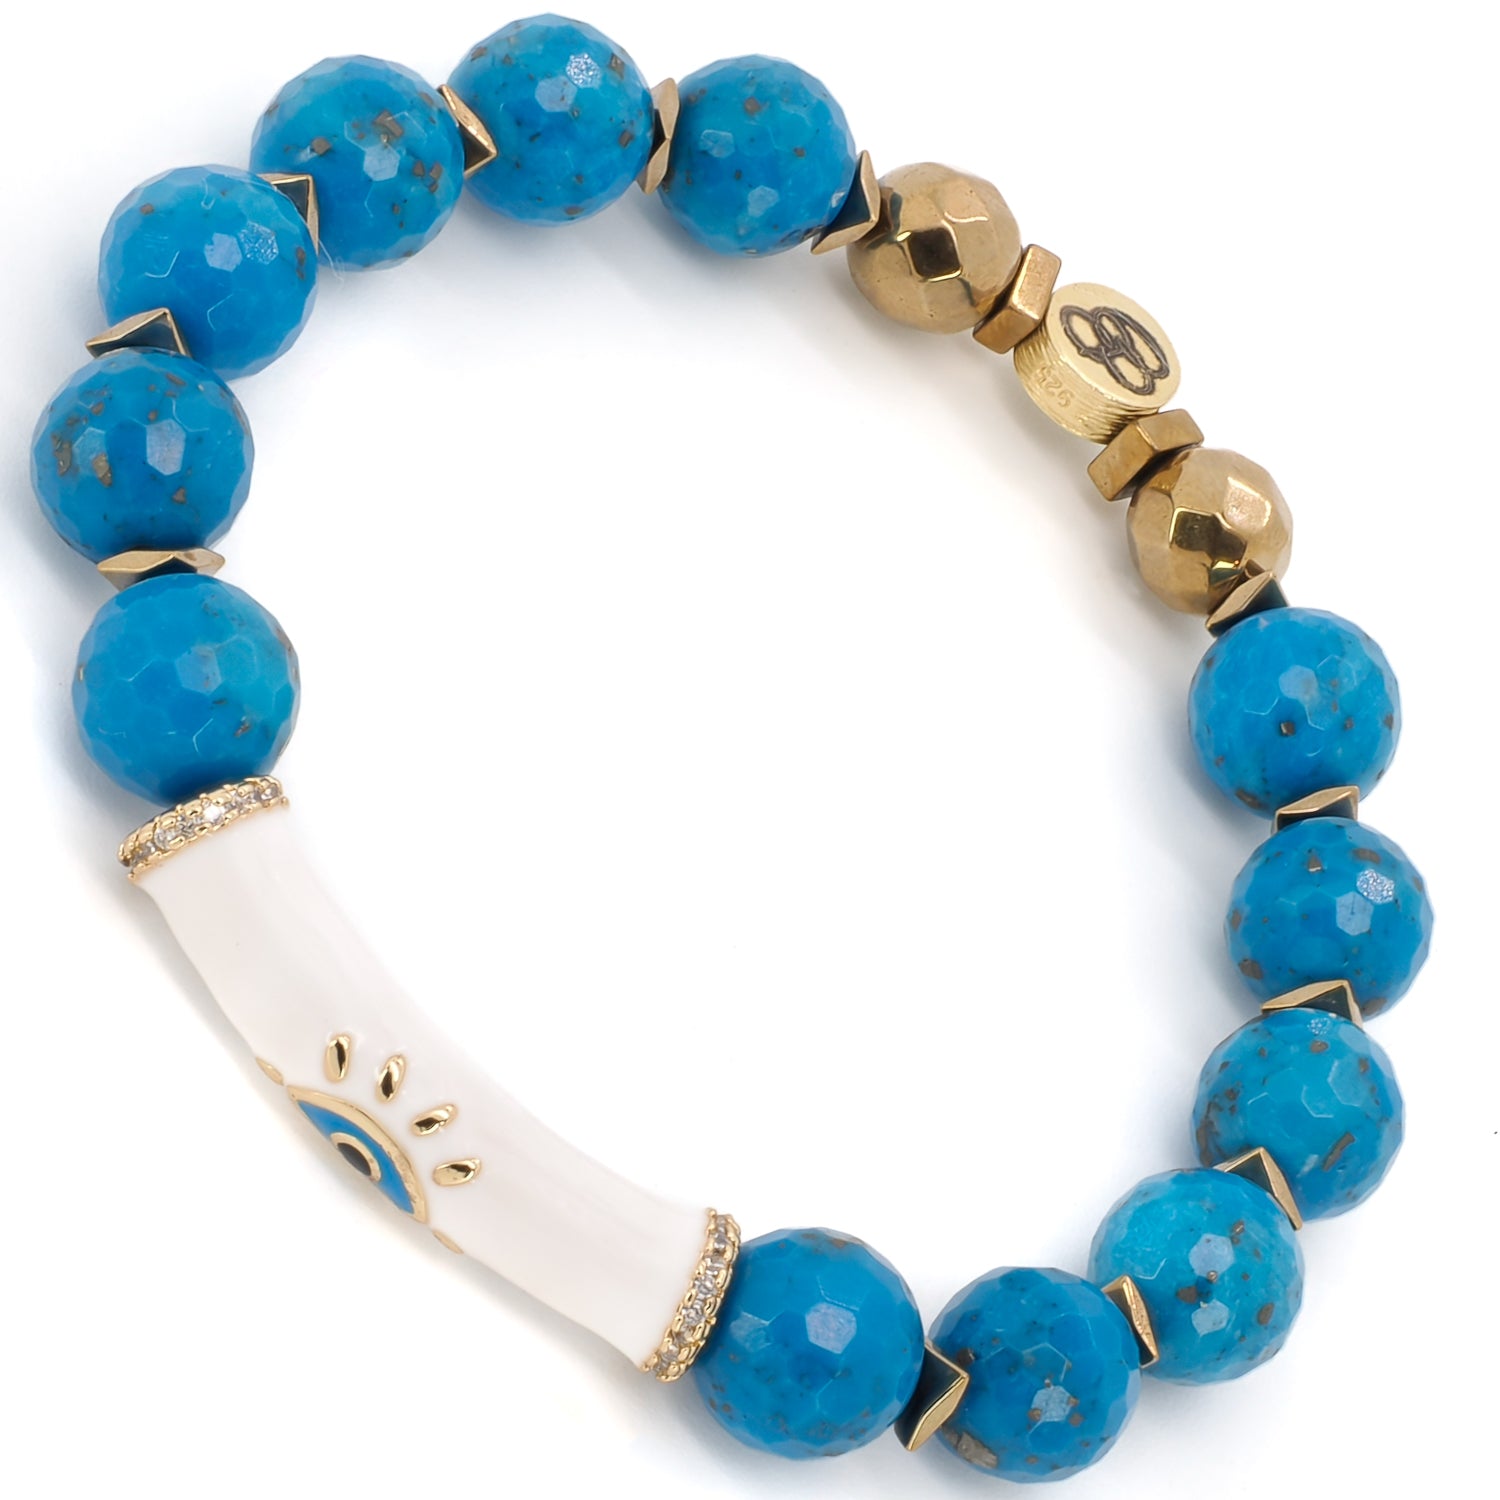 Adorn your wrist with the Turquoise Inner Calm Bracelet and experience the harmonizing energy of turquoise and gold-plated accents.